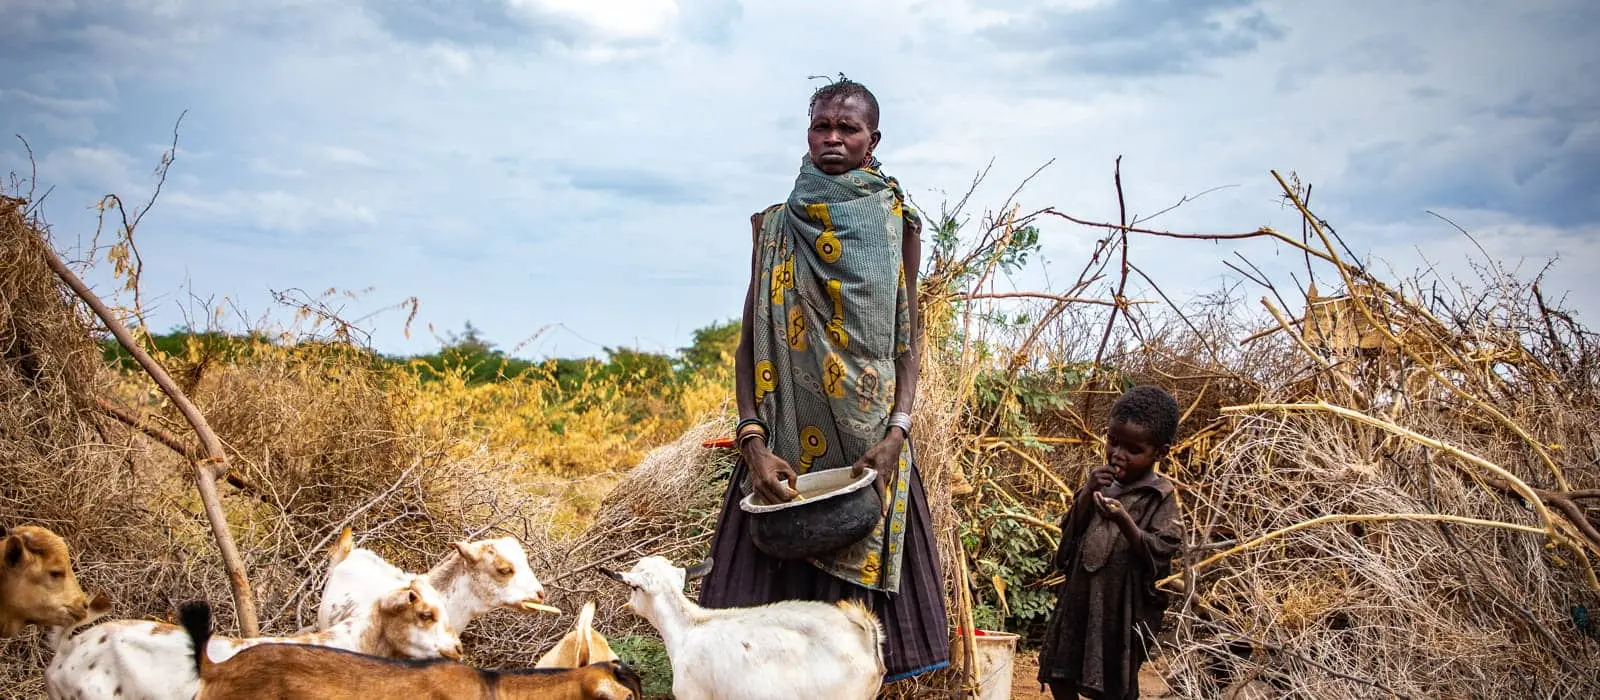 Ng’ikario Ekiru with the last of her goat herd outside their home in Turkana, northern Kenya. She is feeding her family with wild desert fruit and roasted animal hides as the area experiences the second drought in three years.